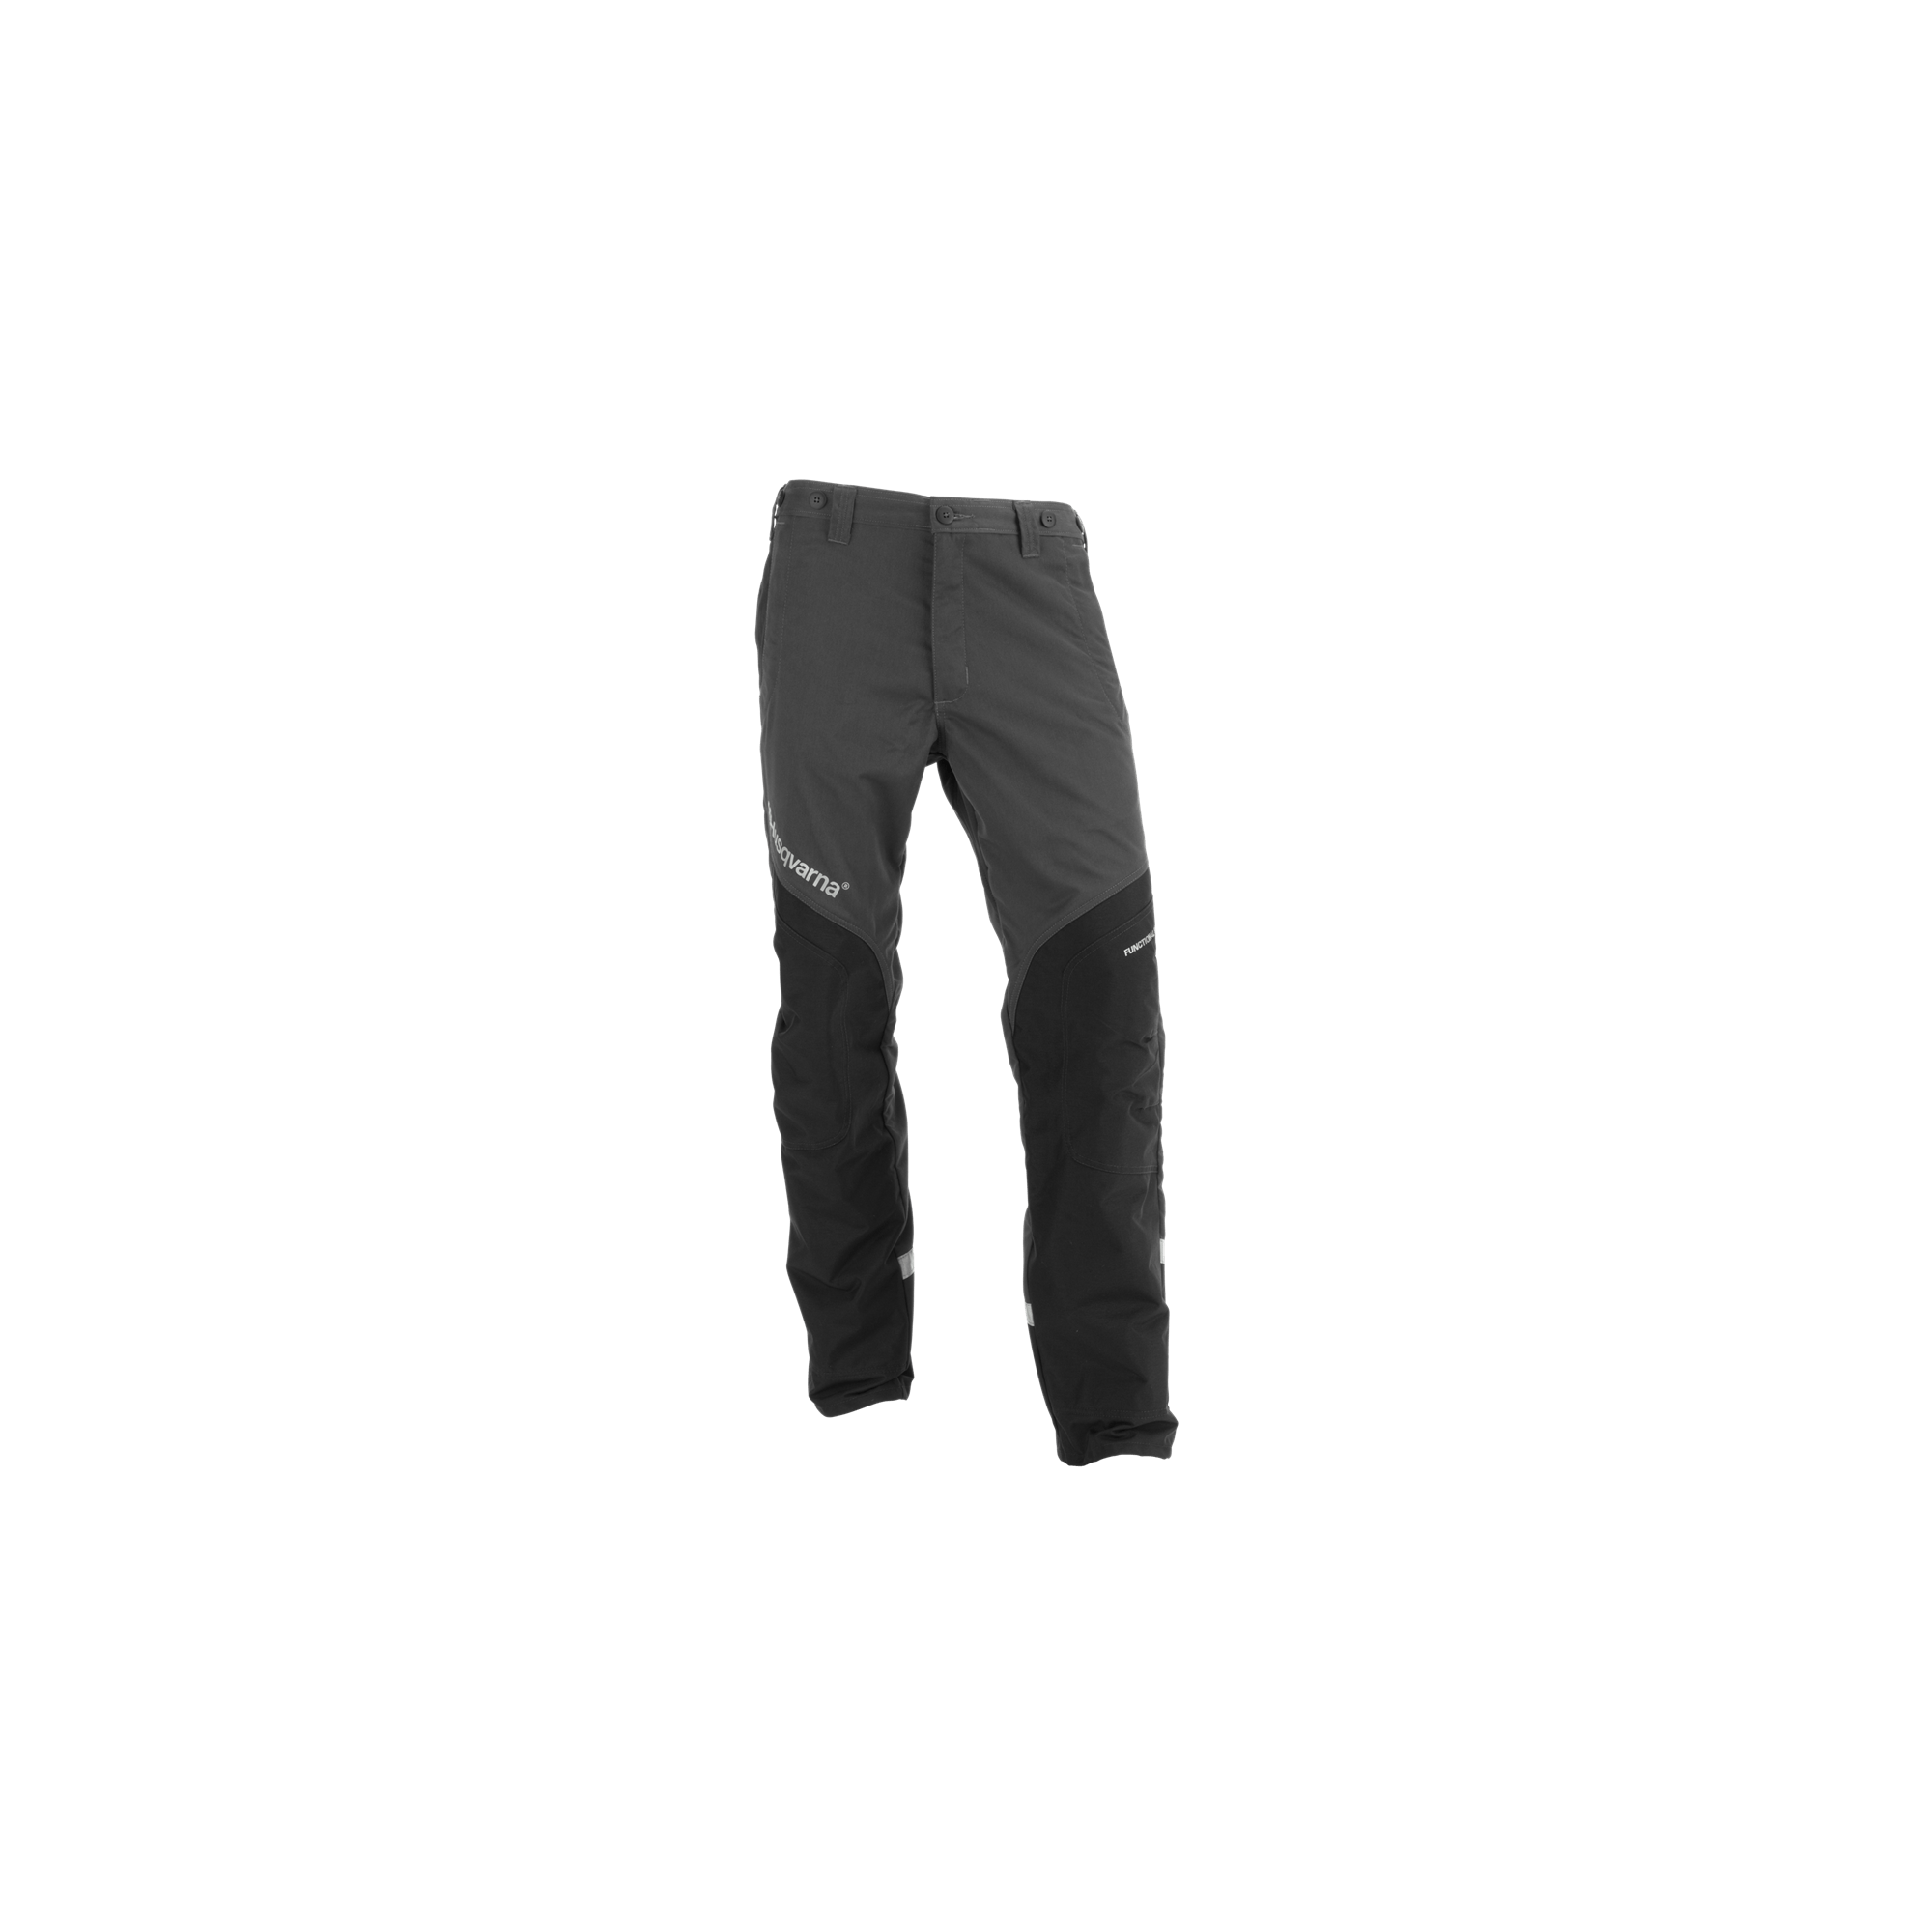 Image for Functional Impact Work Pant from HusqvarnaB2C